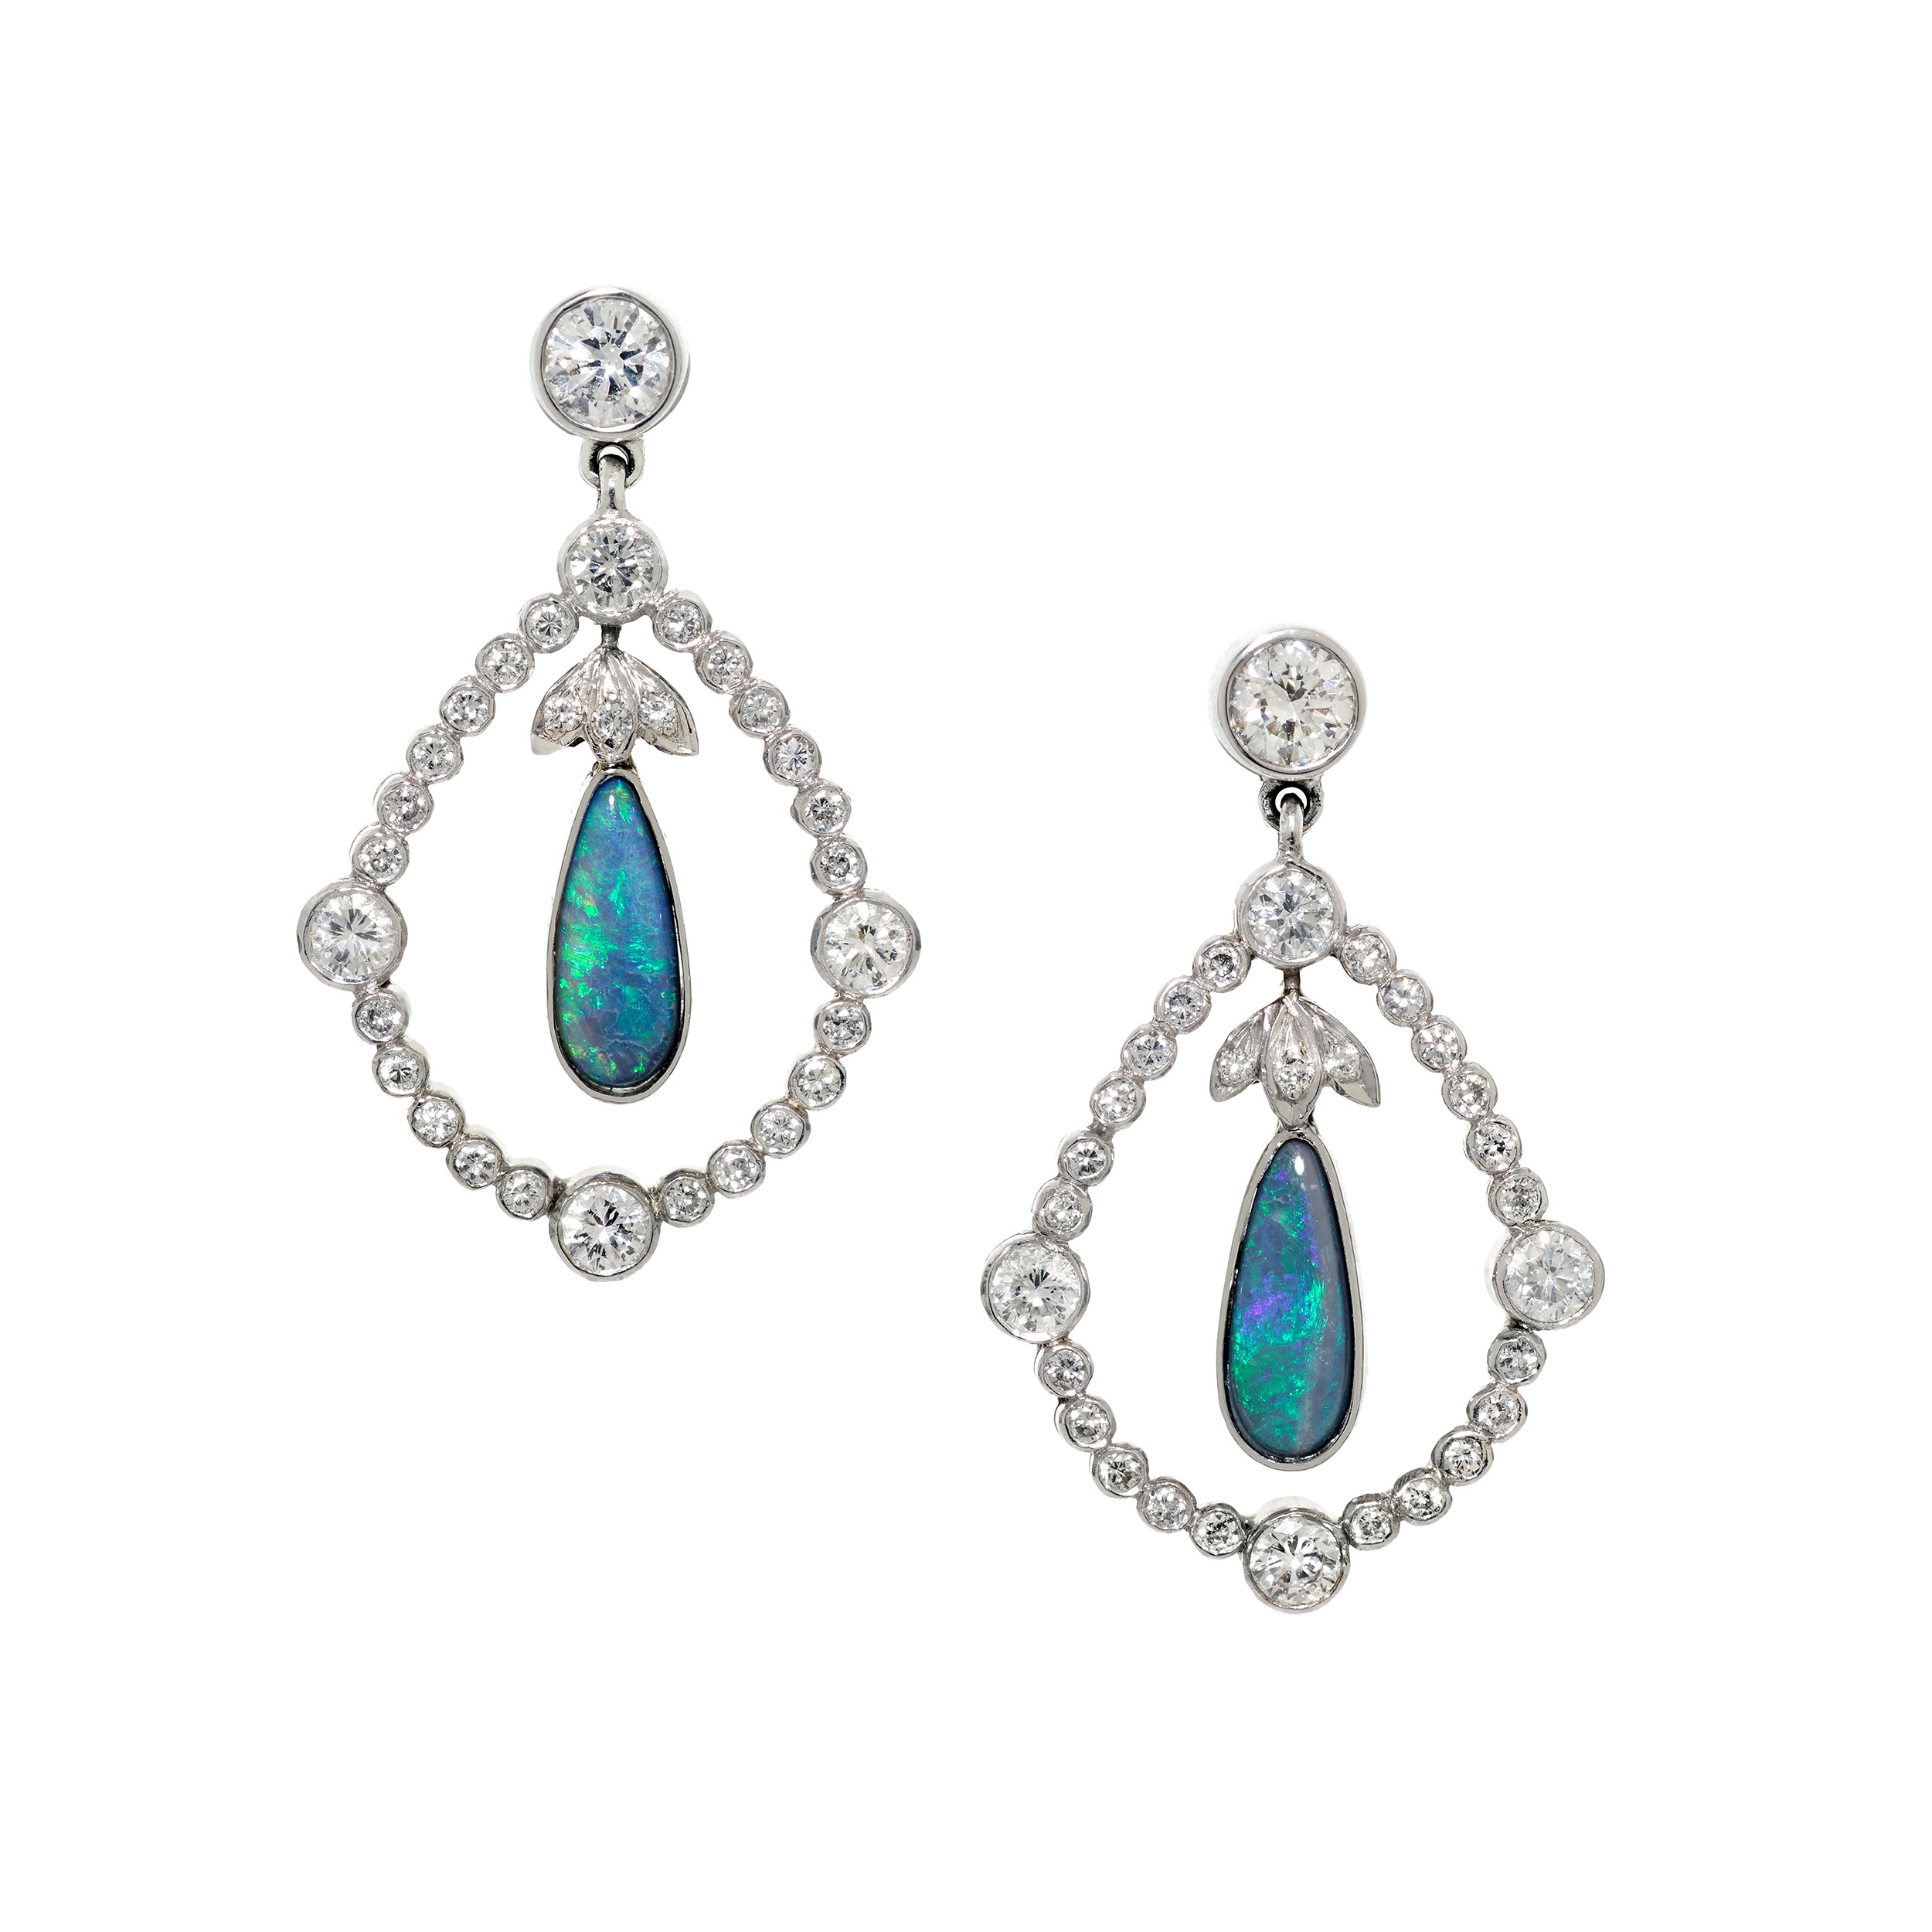 3.06 Carat Pear-Shaped Black Opals and Diamond Earrings in Platinum ...